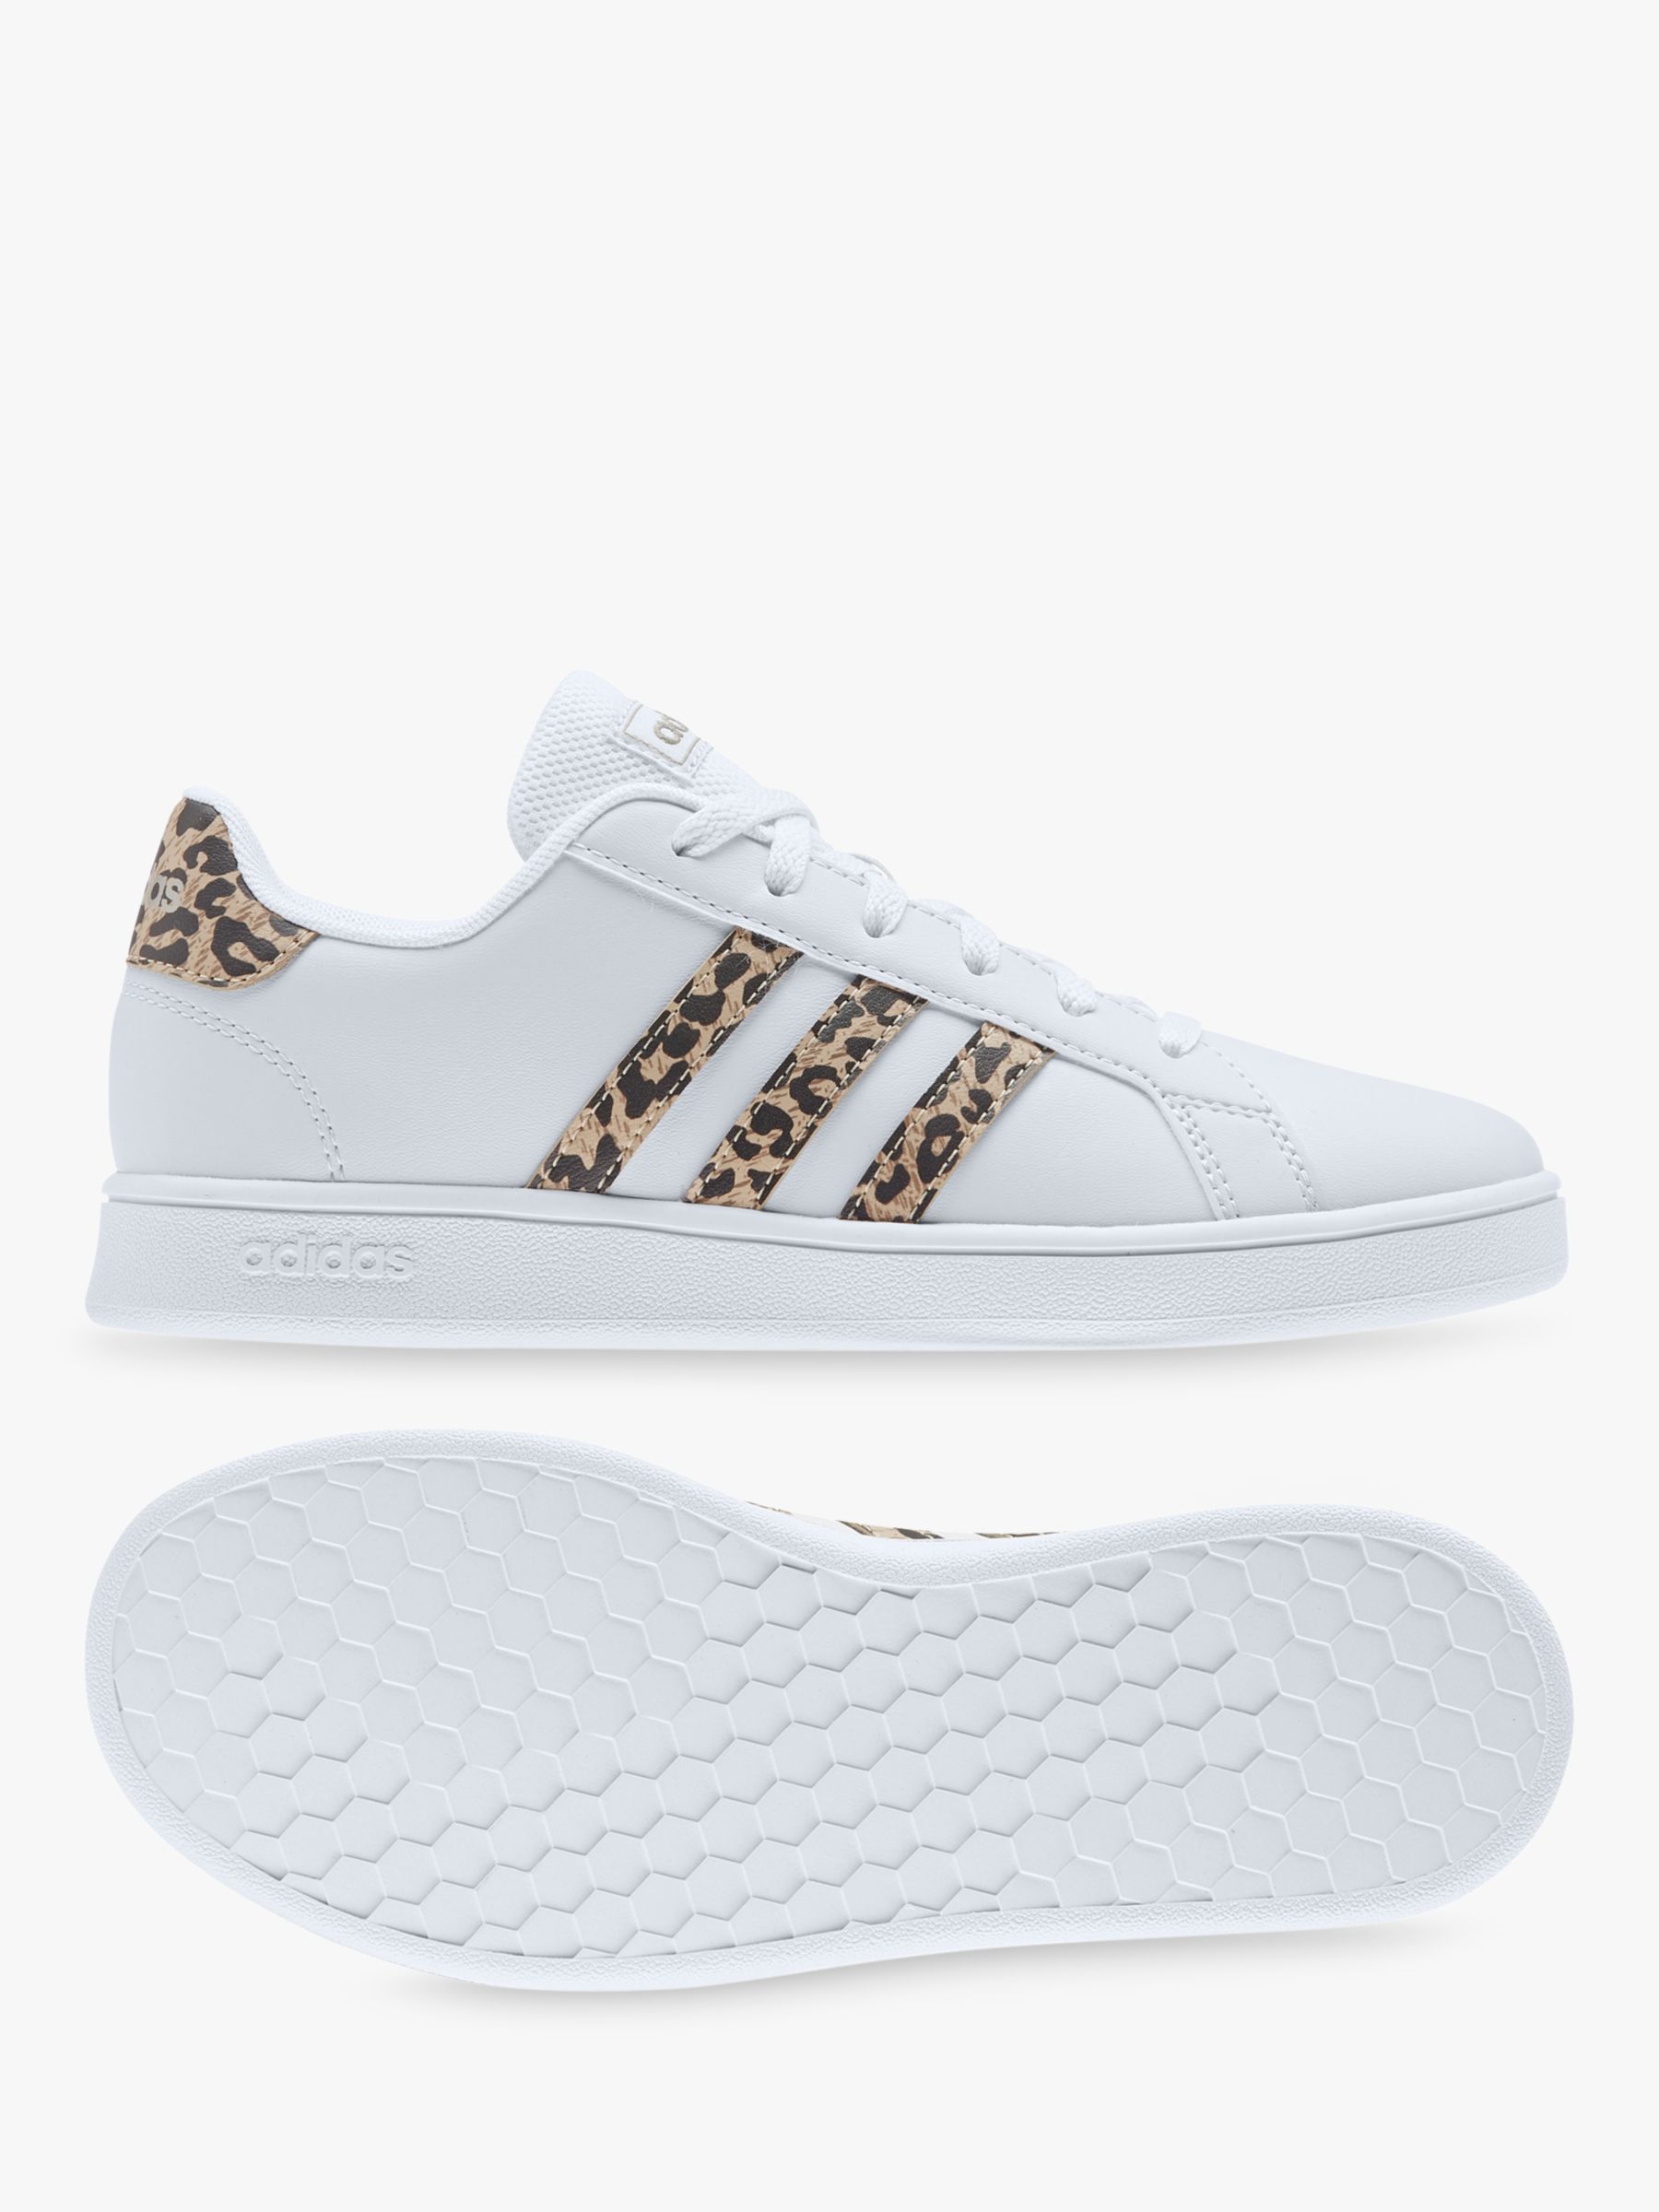 adidas grand court trainers leopard